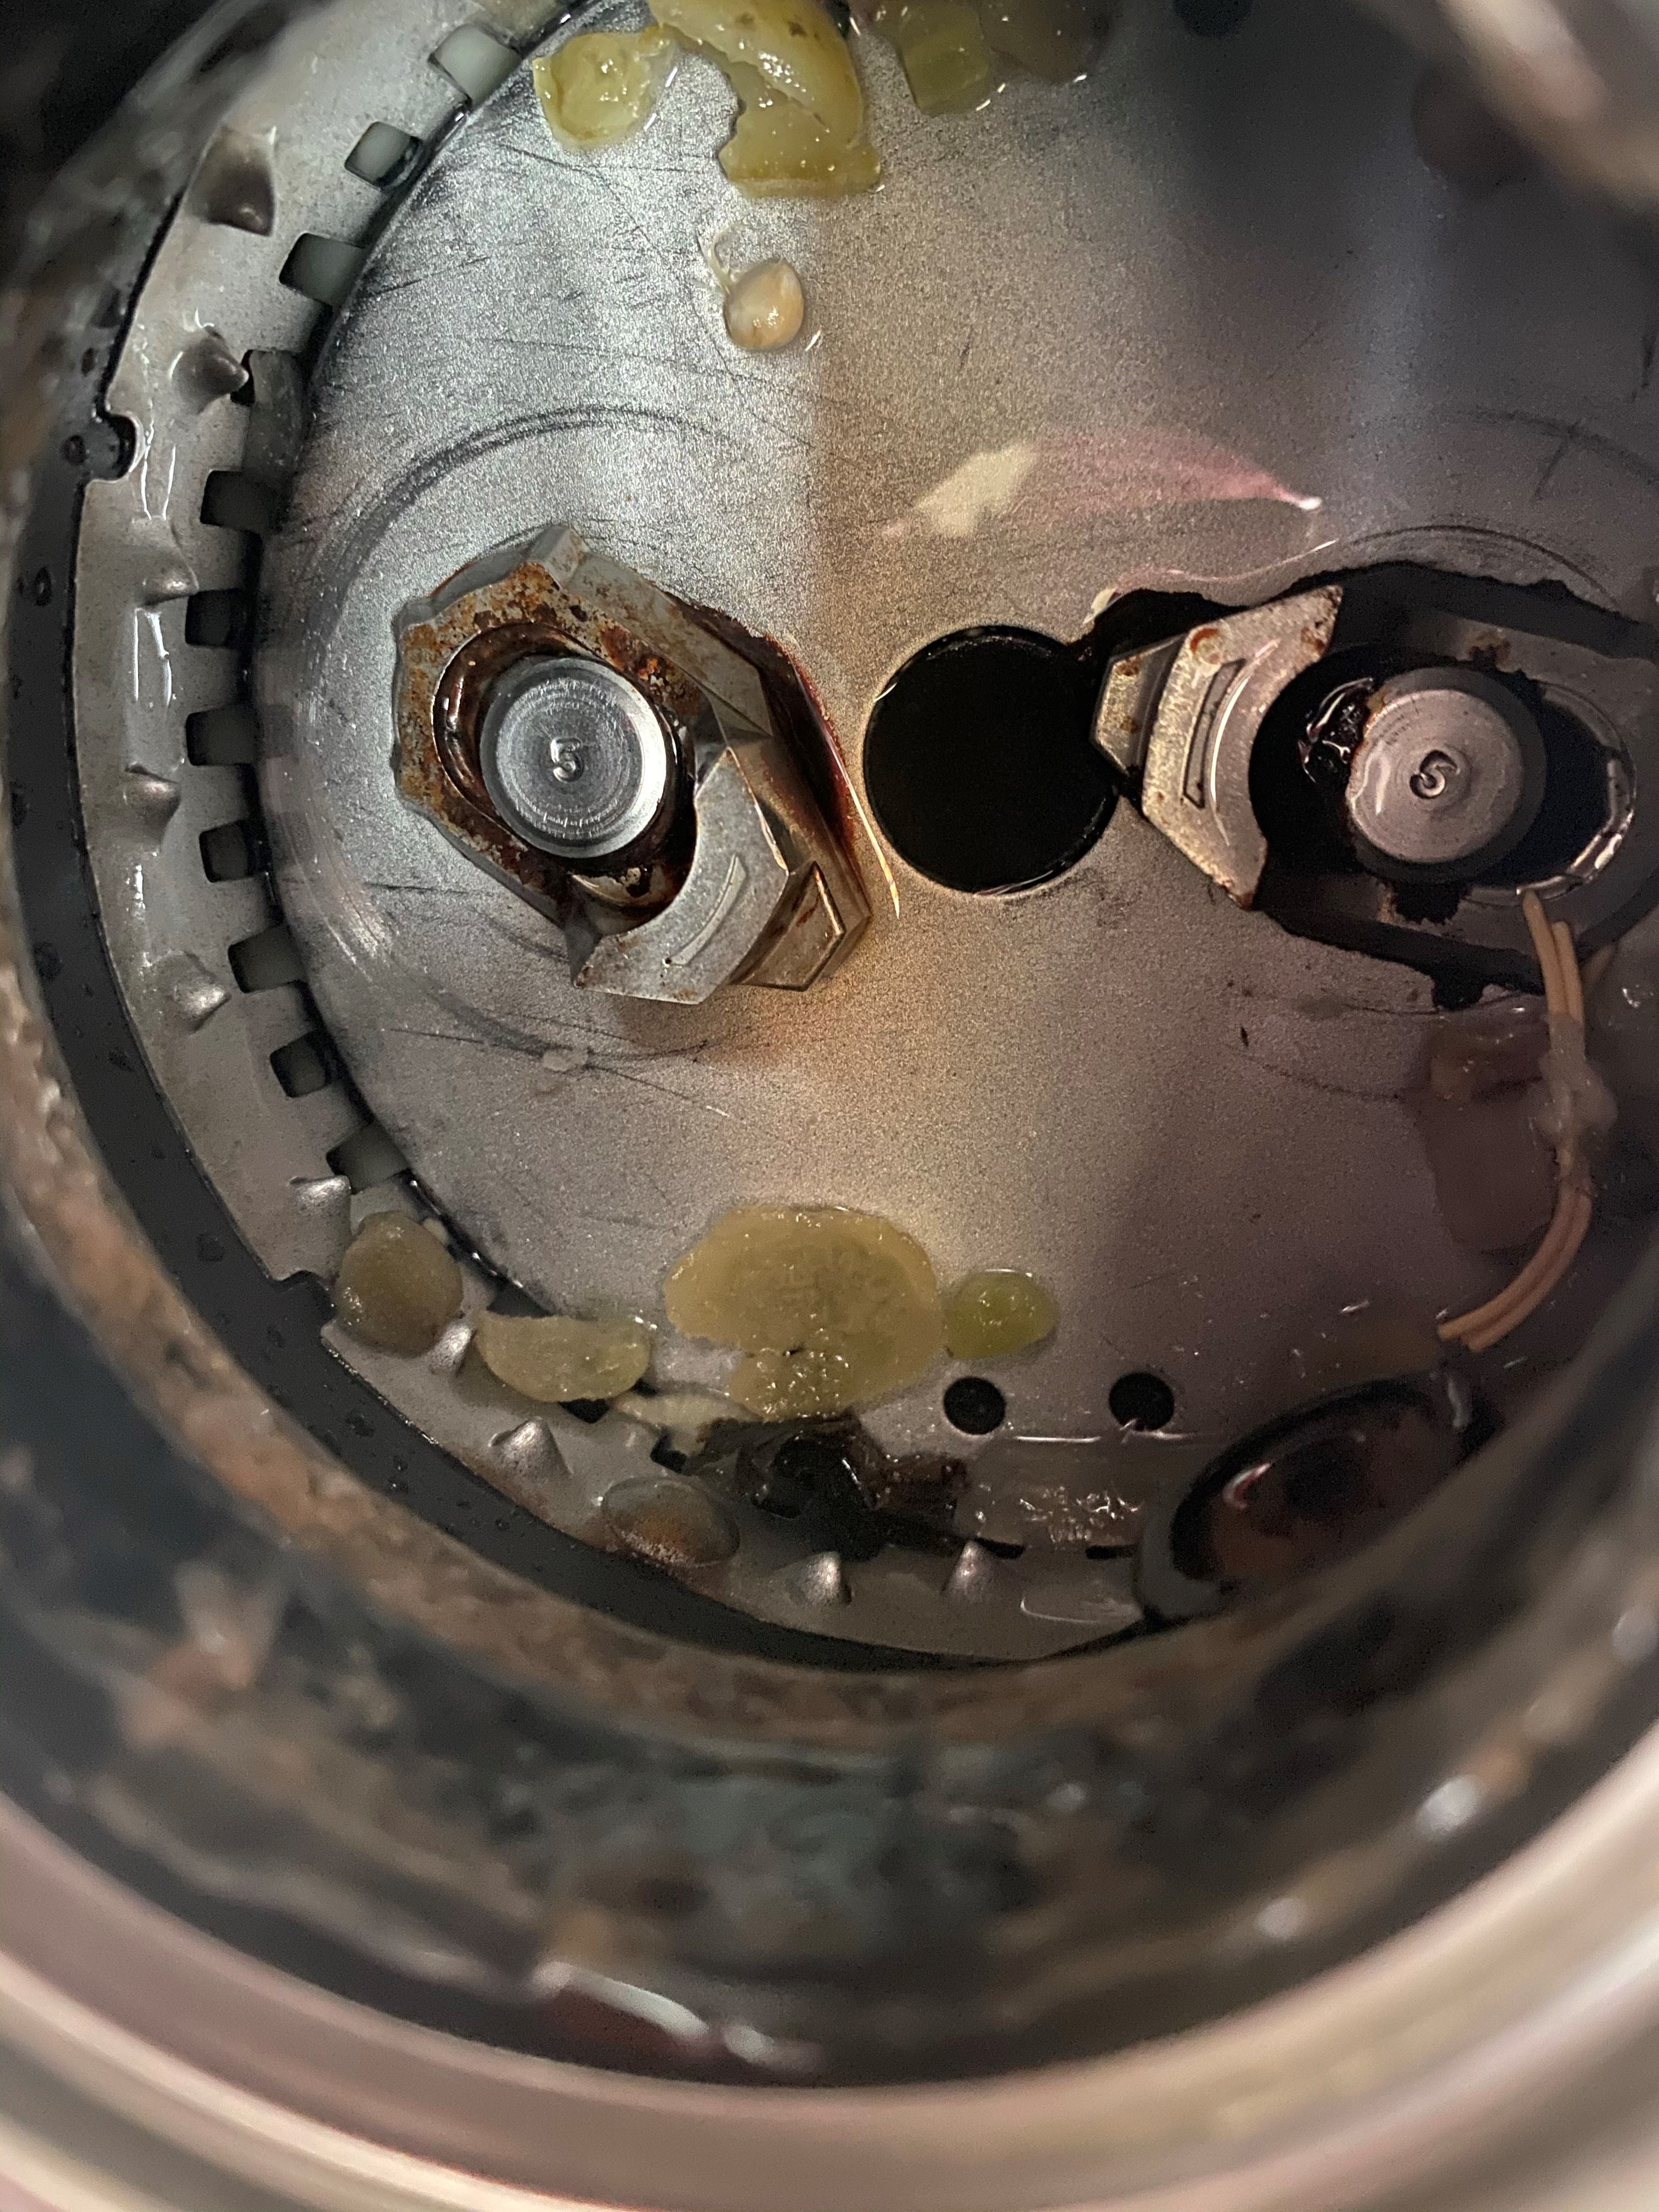 Stainless Steel Garbage Disposal Grinder Chamber After 5 Years of Use